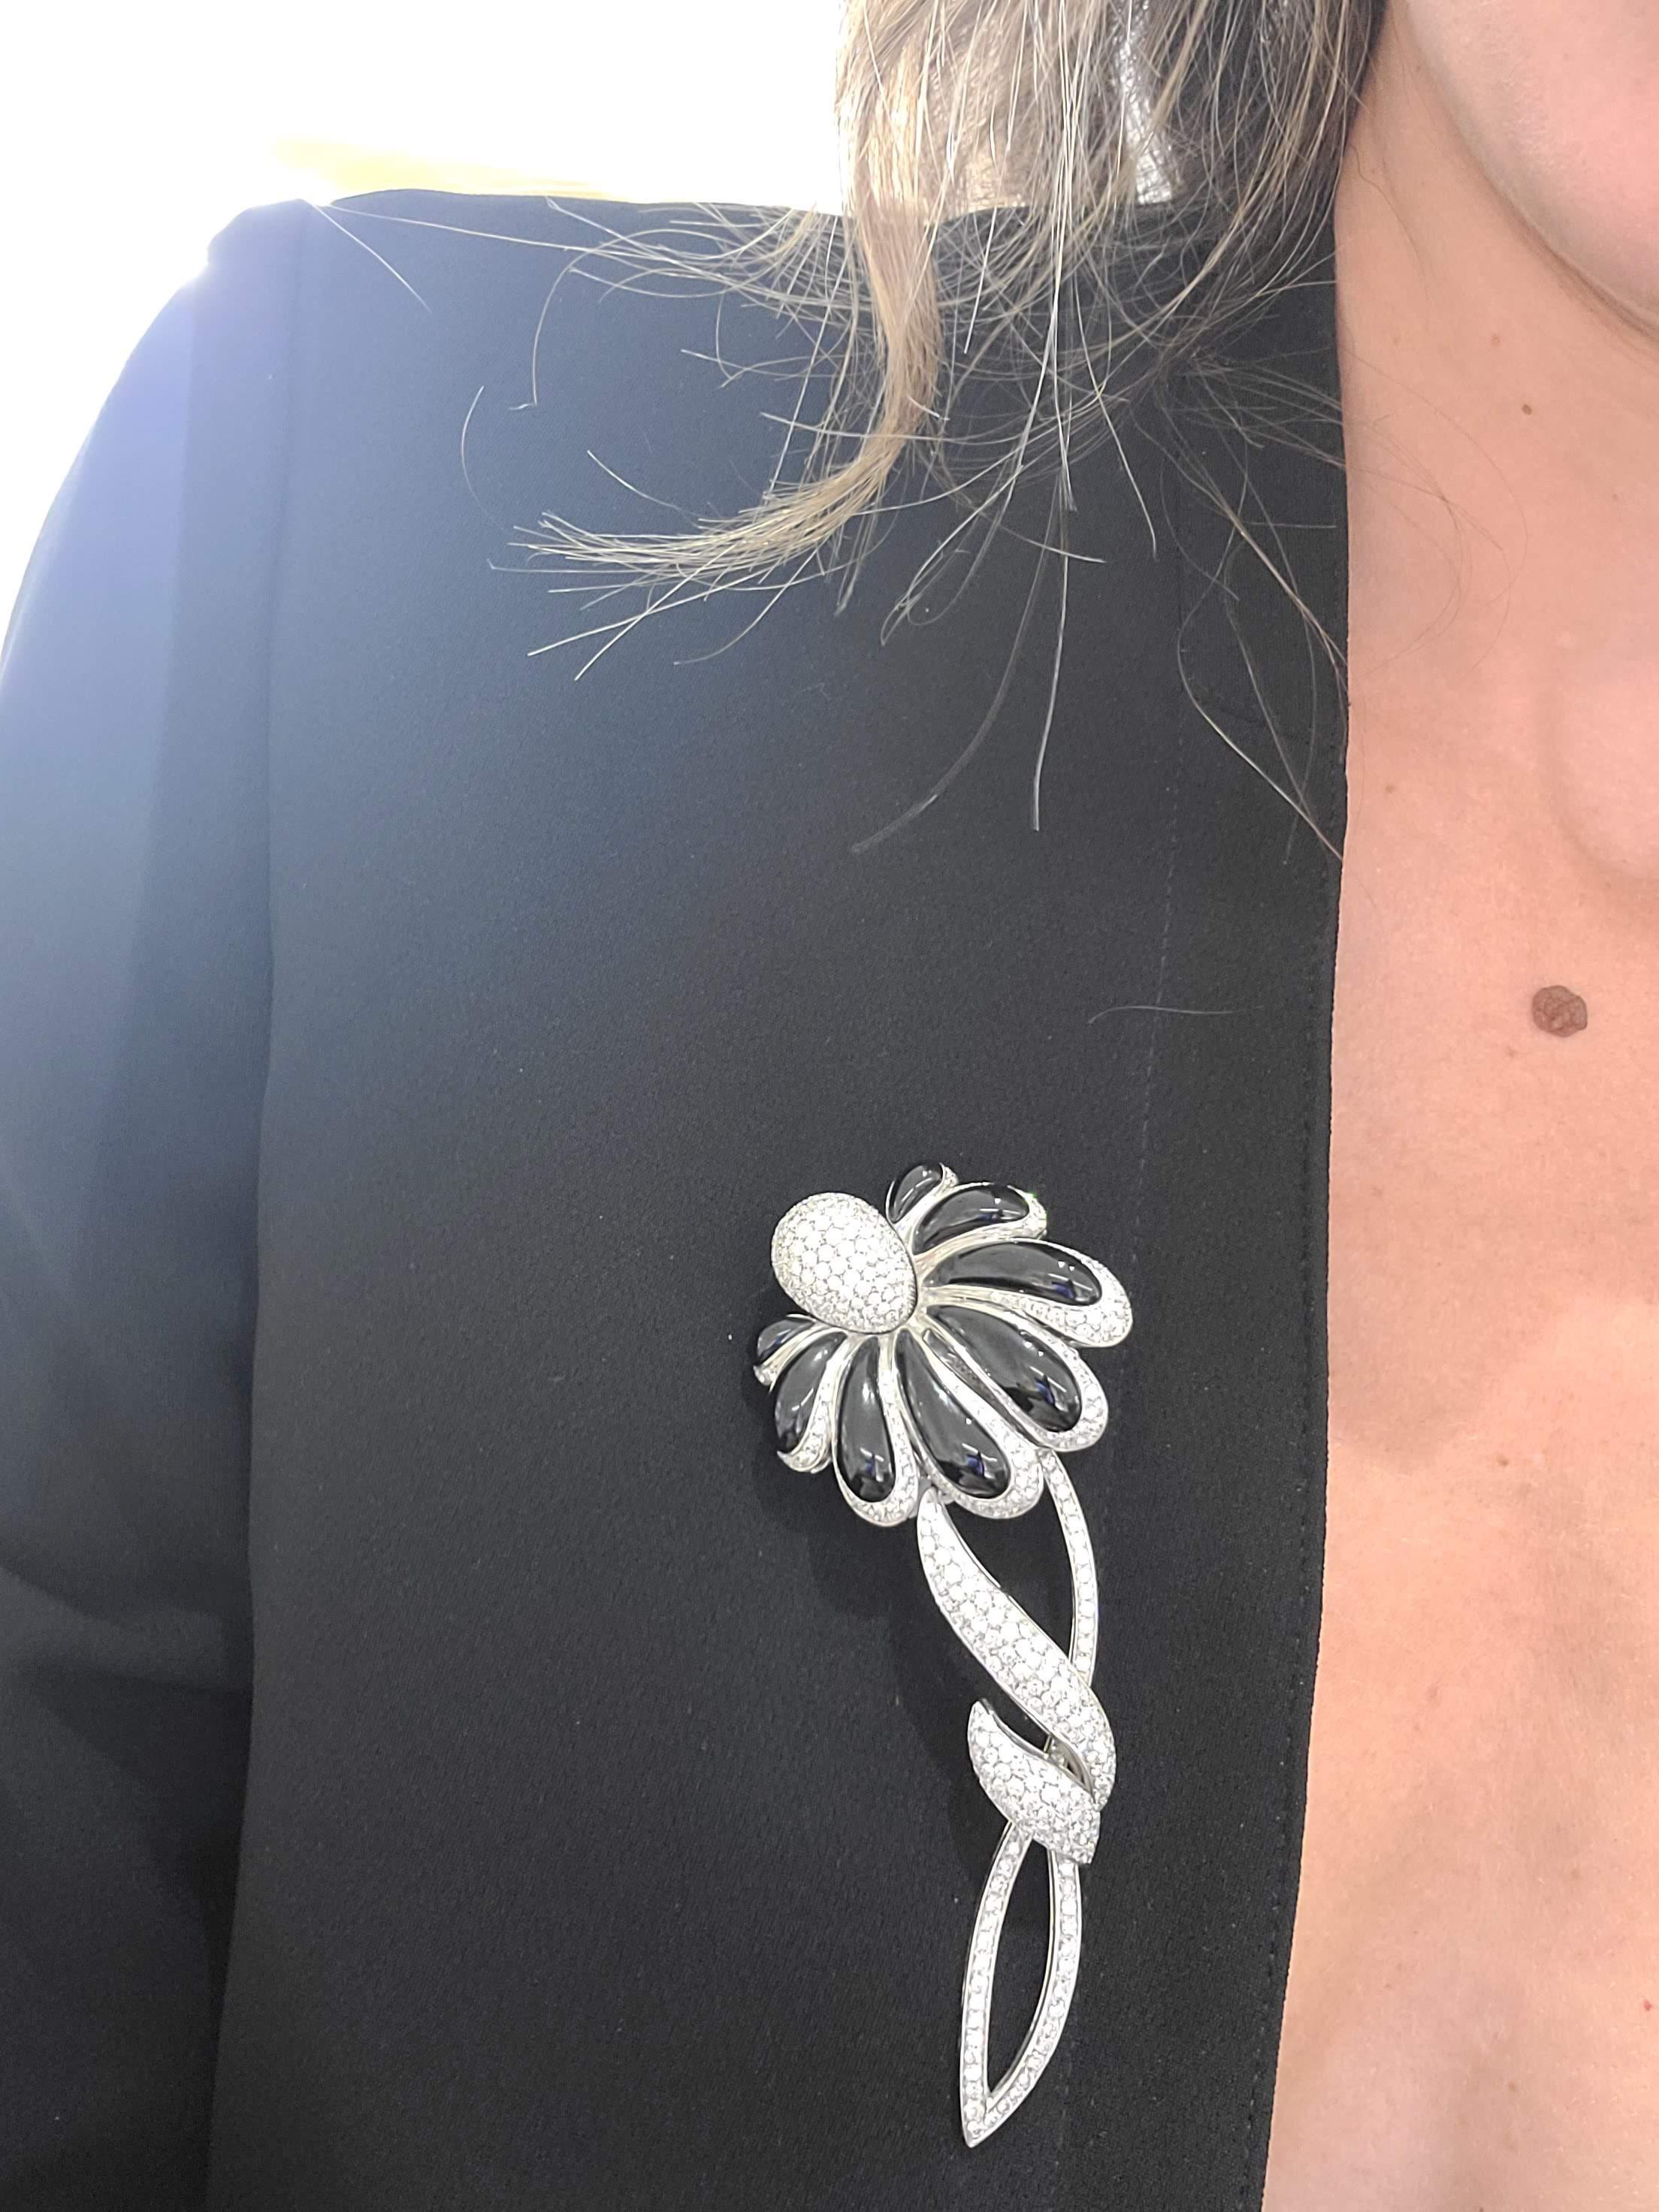 This intricate 18 karat white gold flower brooch was made exclusively for Cellini in Italy by Roberto Casarin. The petals are beautifully set with pave diamonds and polished black onyx. The flower is further detailed with the bud, stem, and leaves